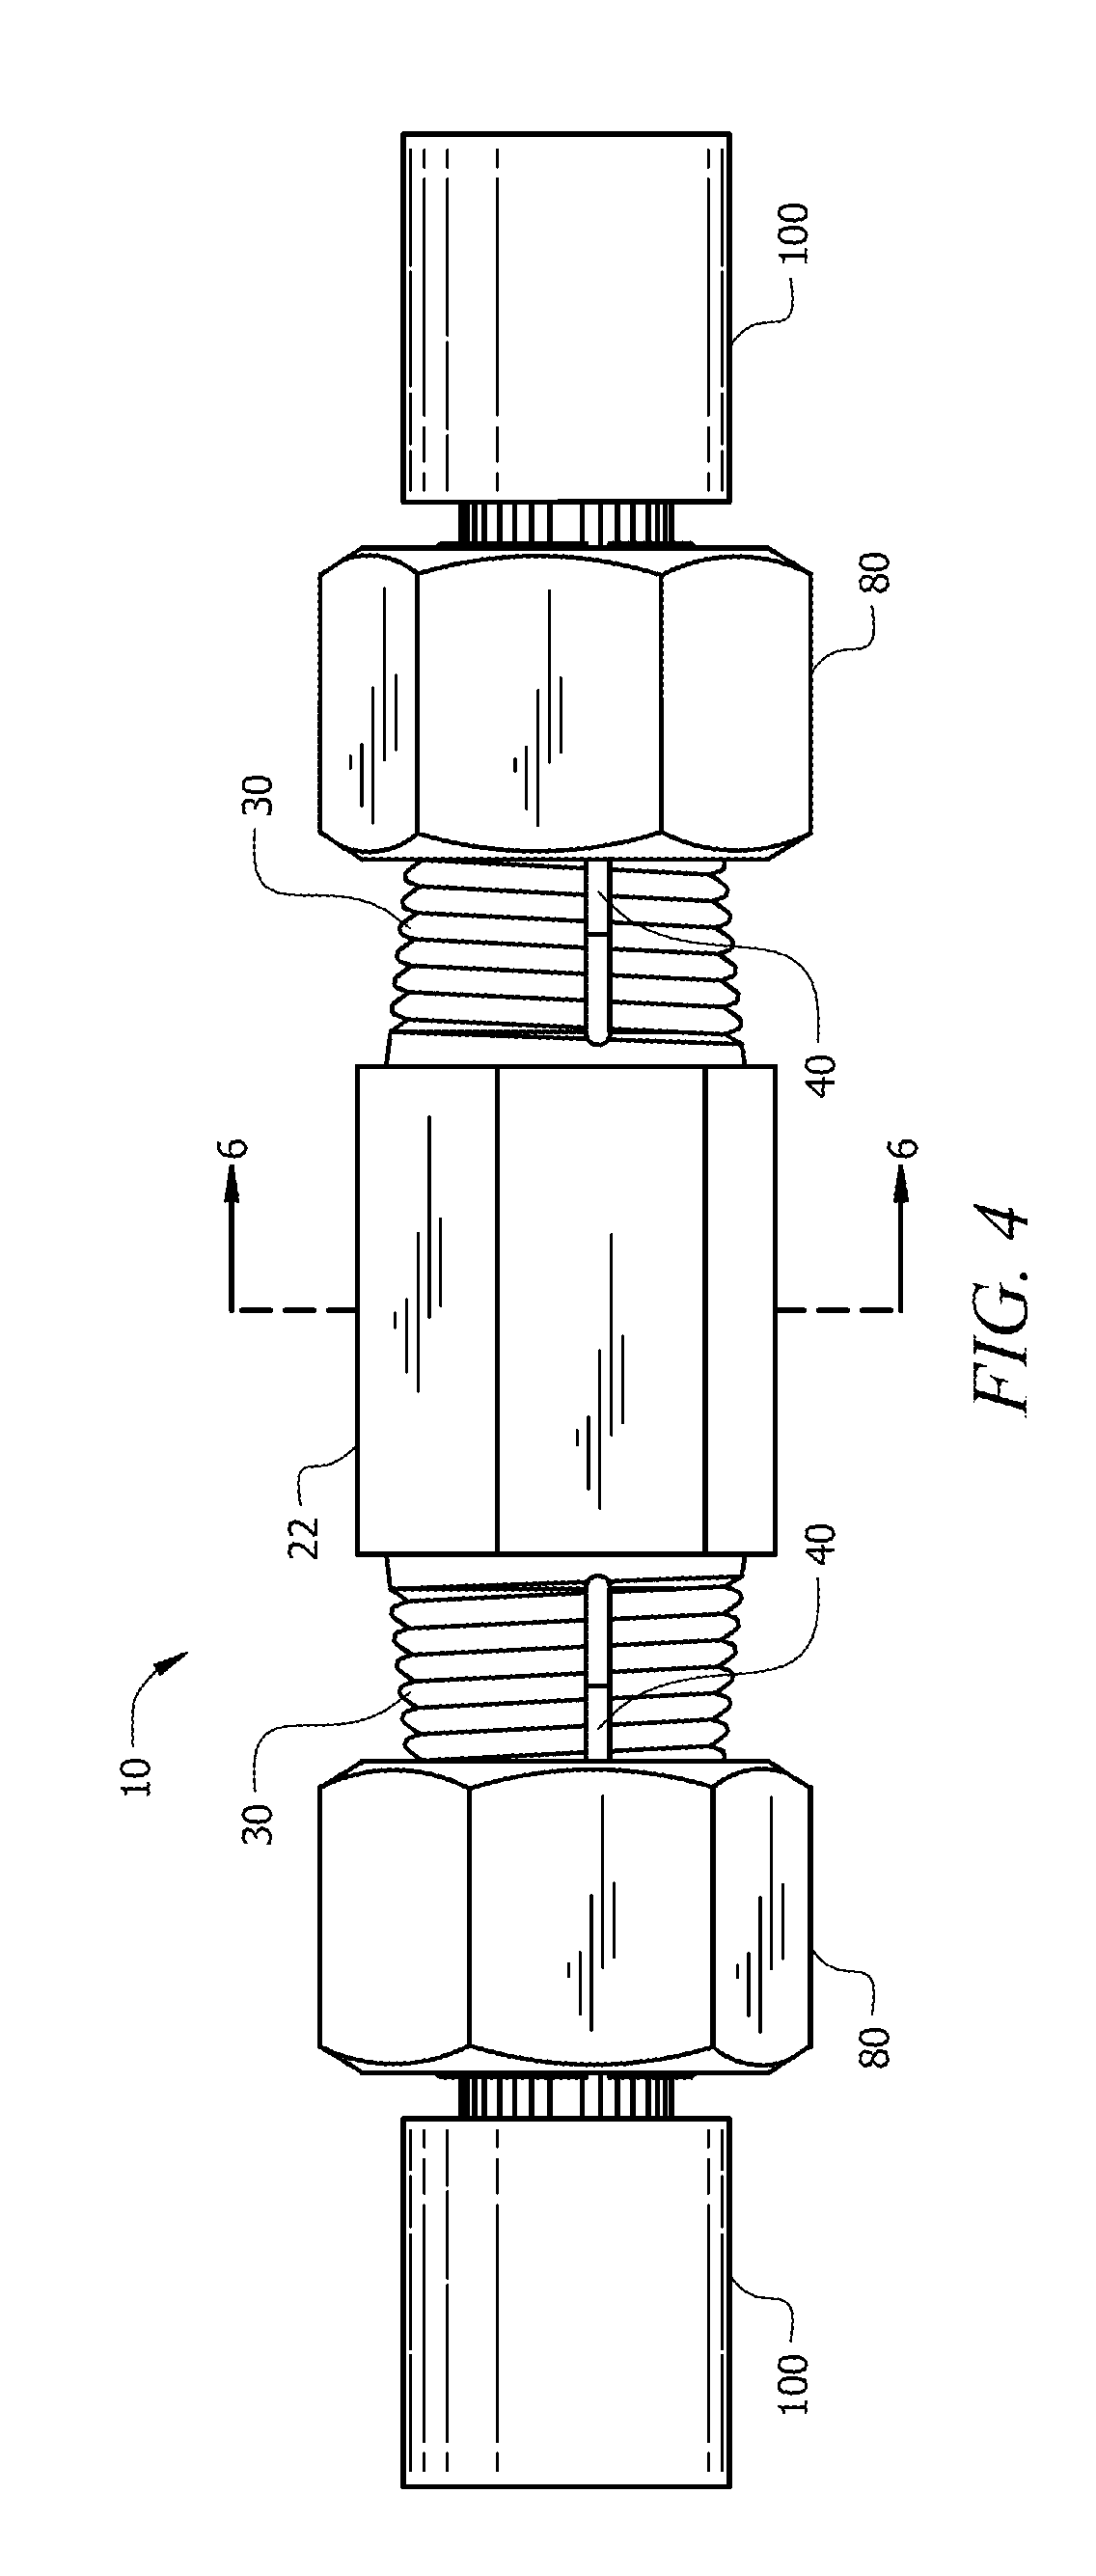 Connector device for joining multiple conductors